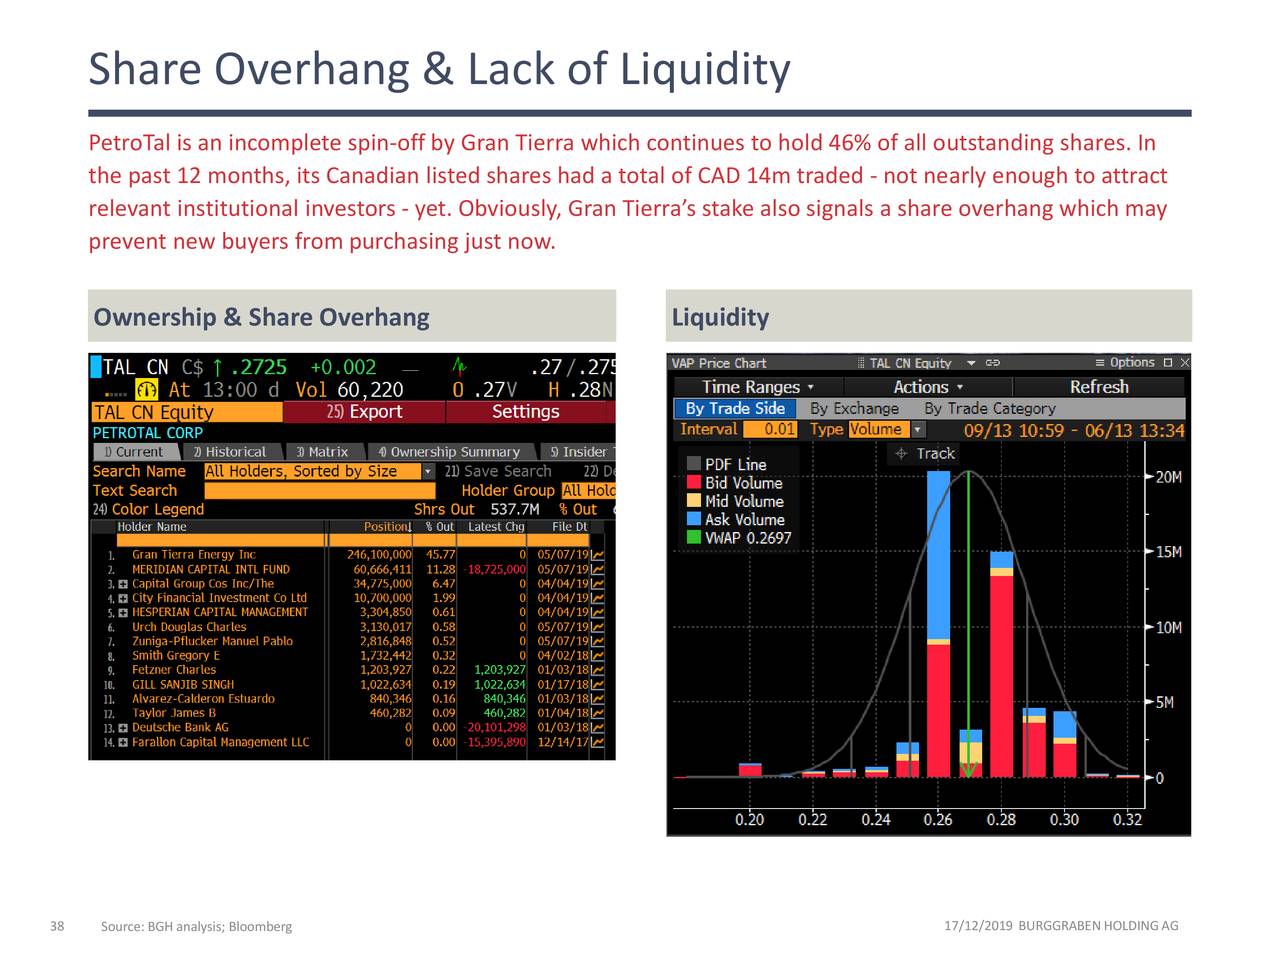 Share Overhang & Lack of Liquidity